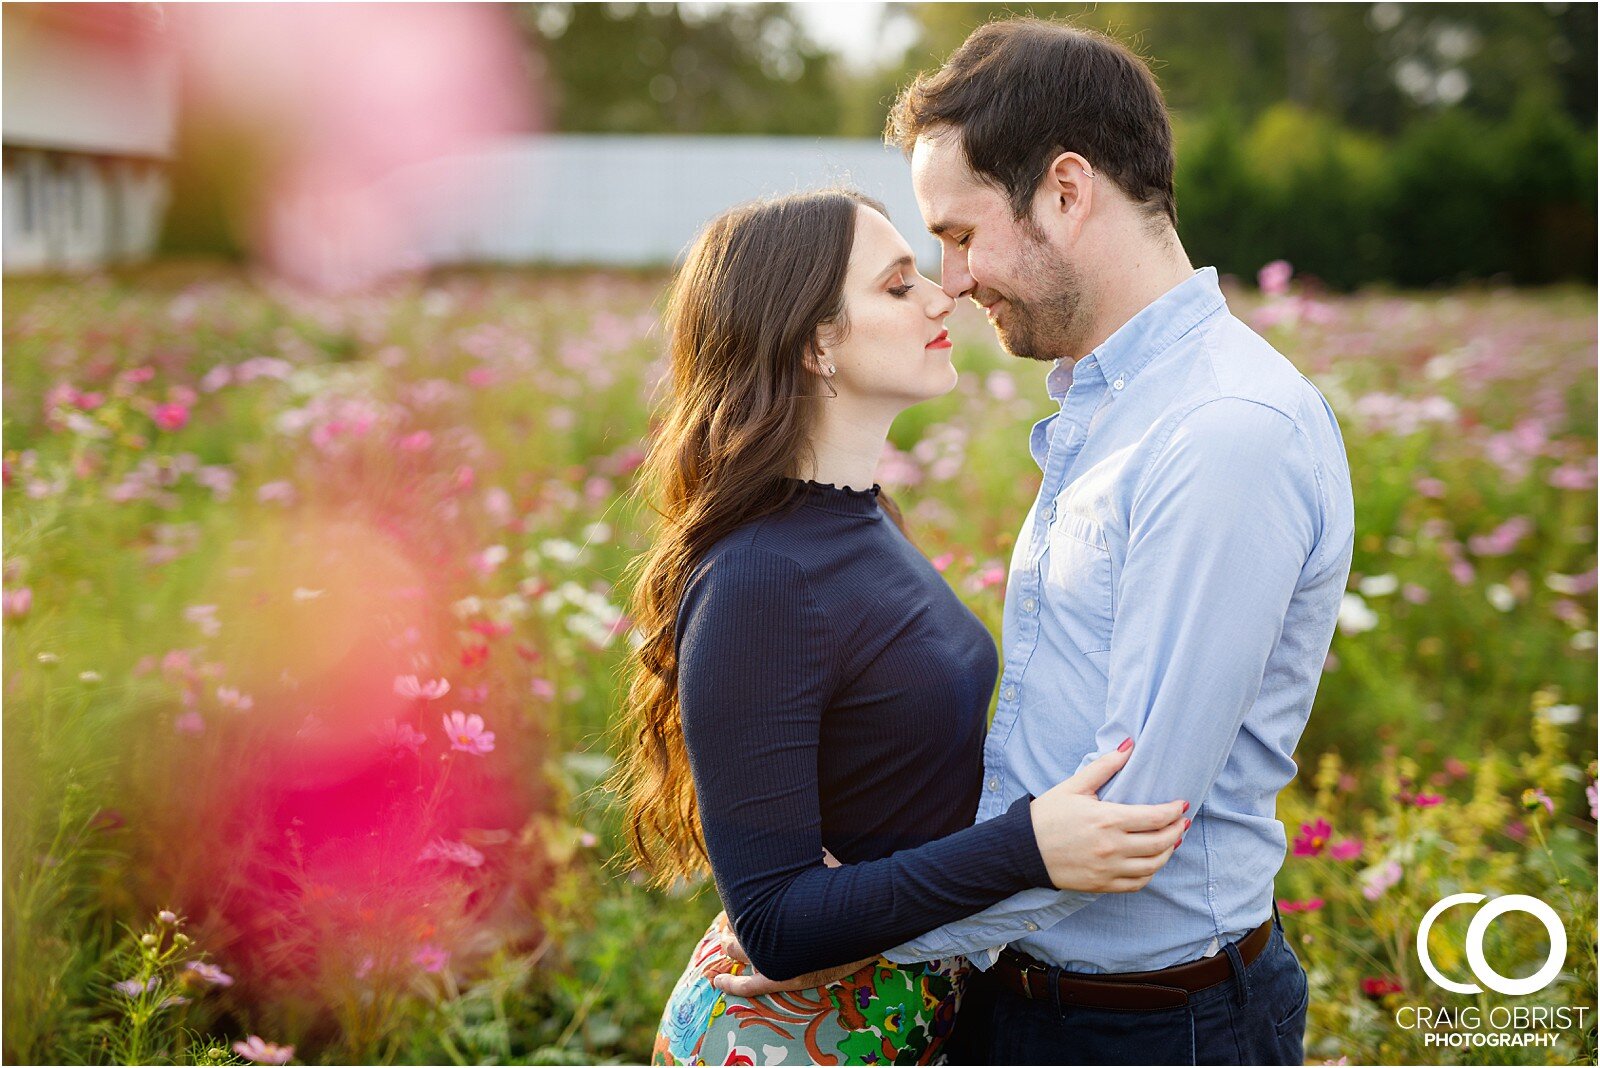 The Barn at Little River Little River Farms Engagement Wedding Portraits Fairy Tale_0016.jpg